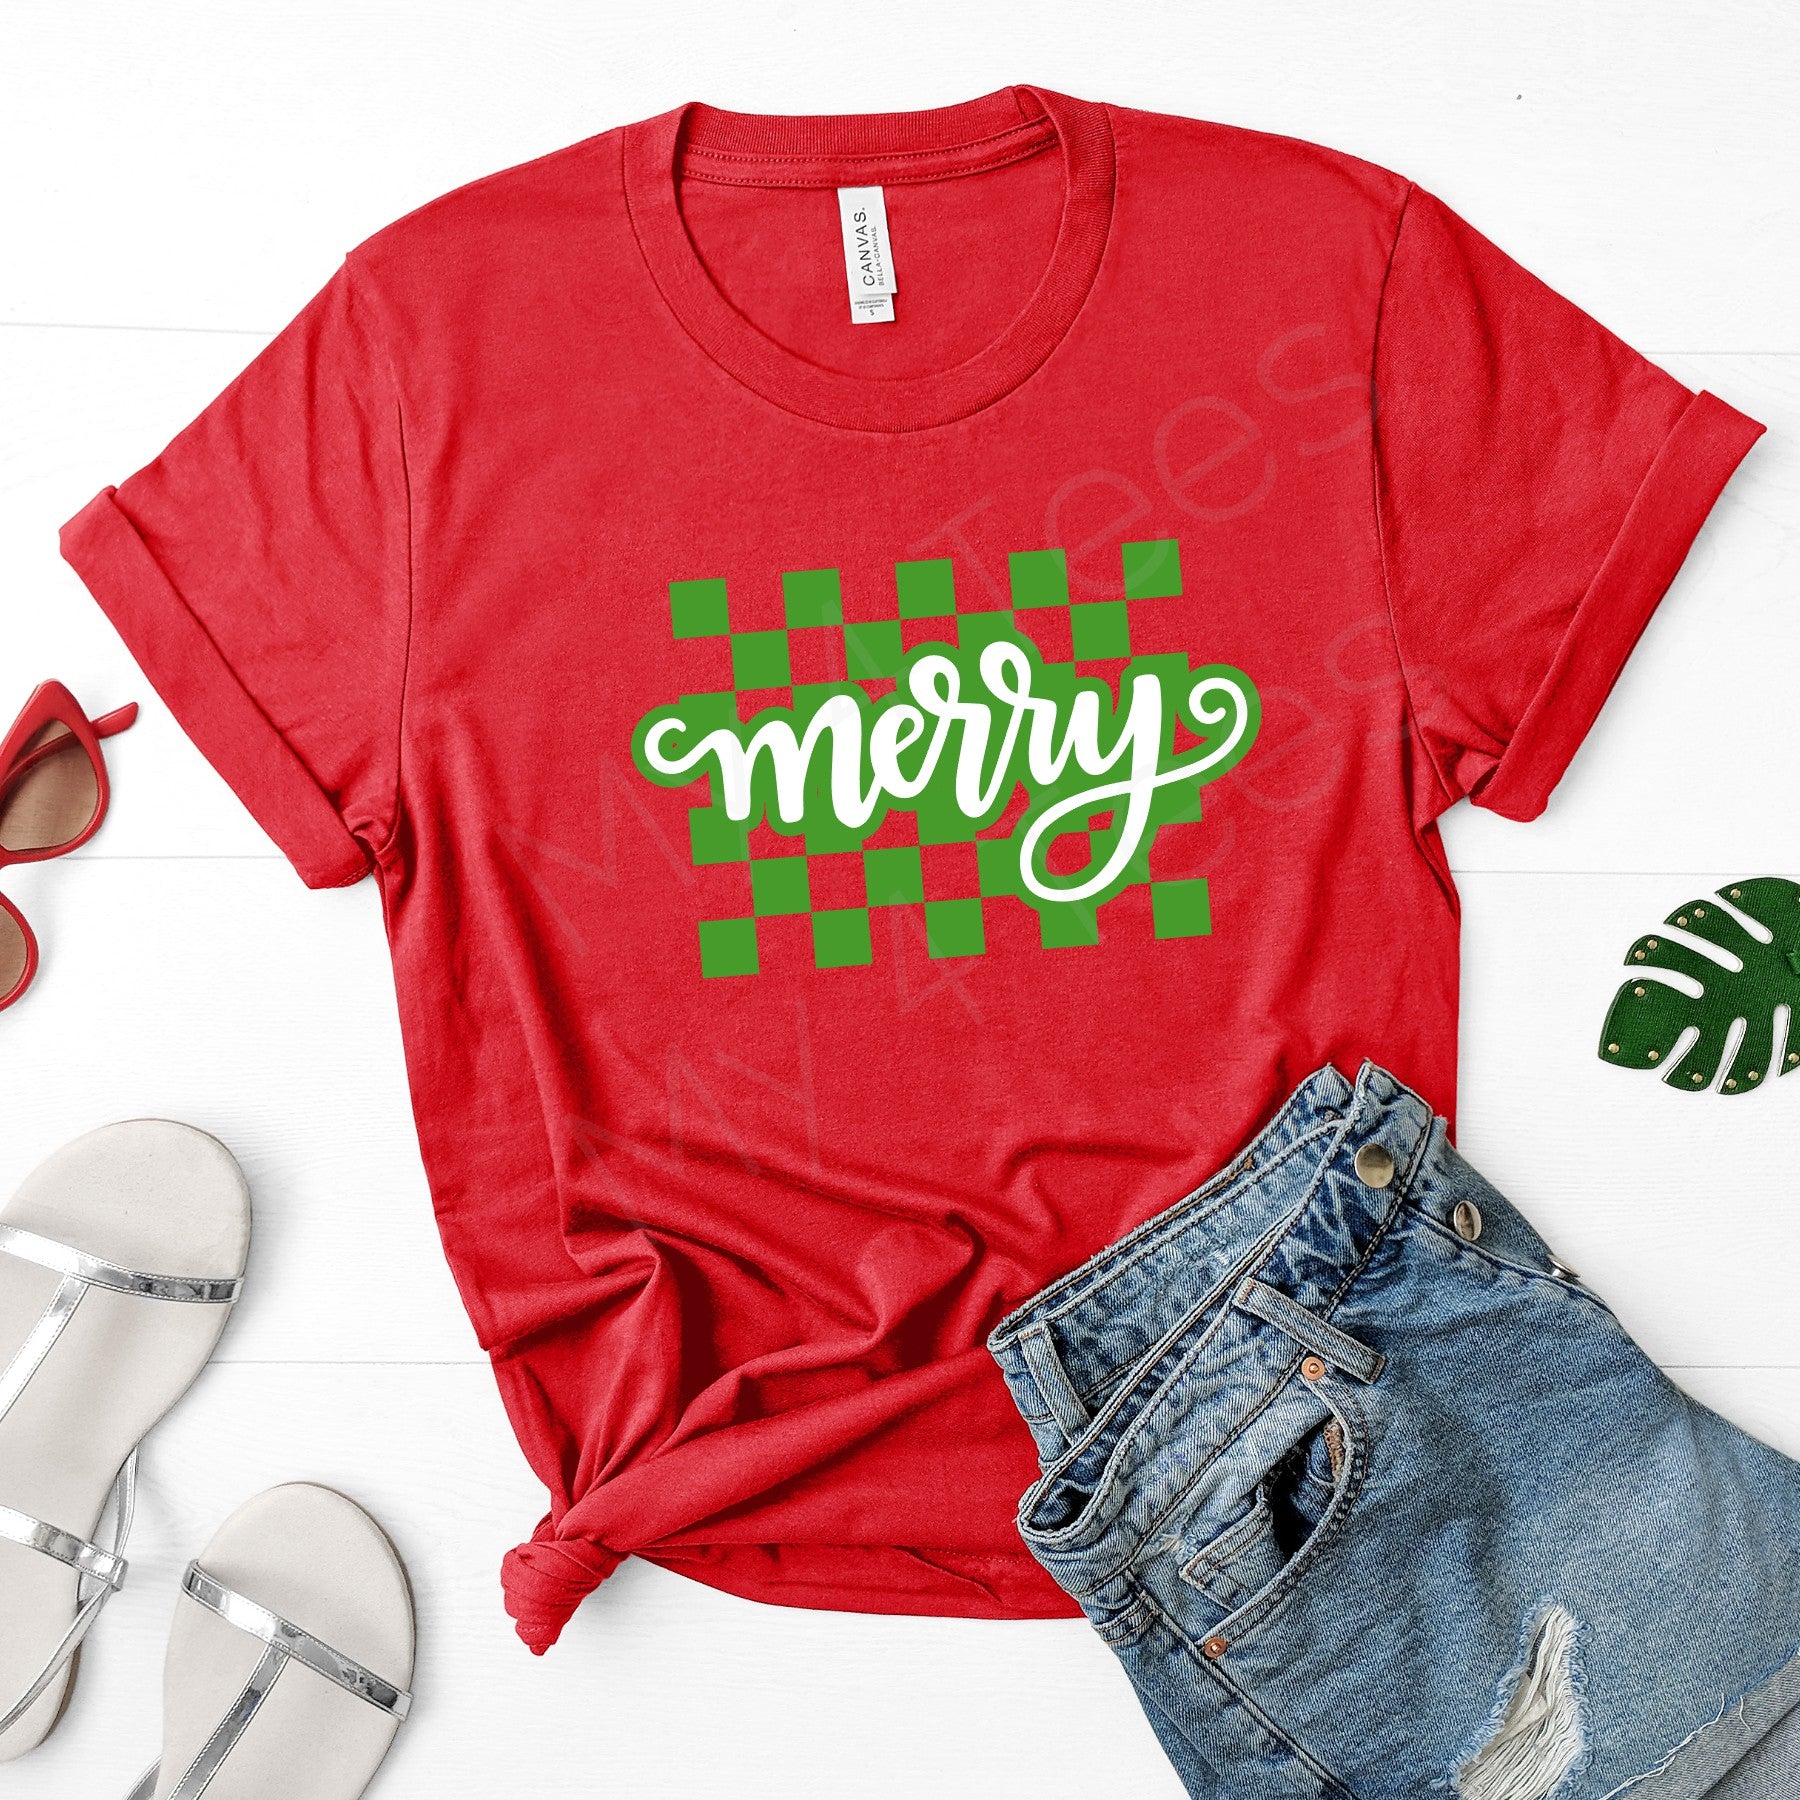 "merry" Christmas graphic tee in red  |  "merry" holiday sweatshirt in red  |  youth & adult sizes